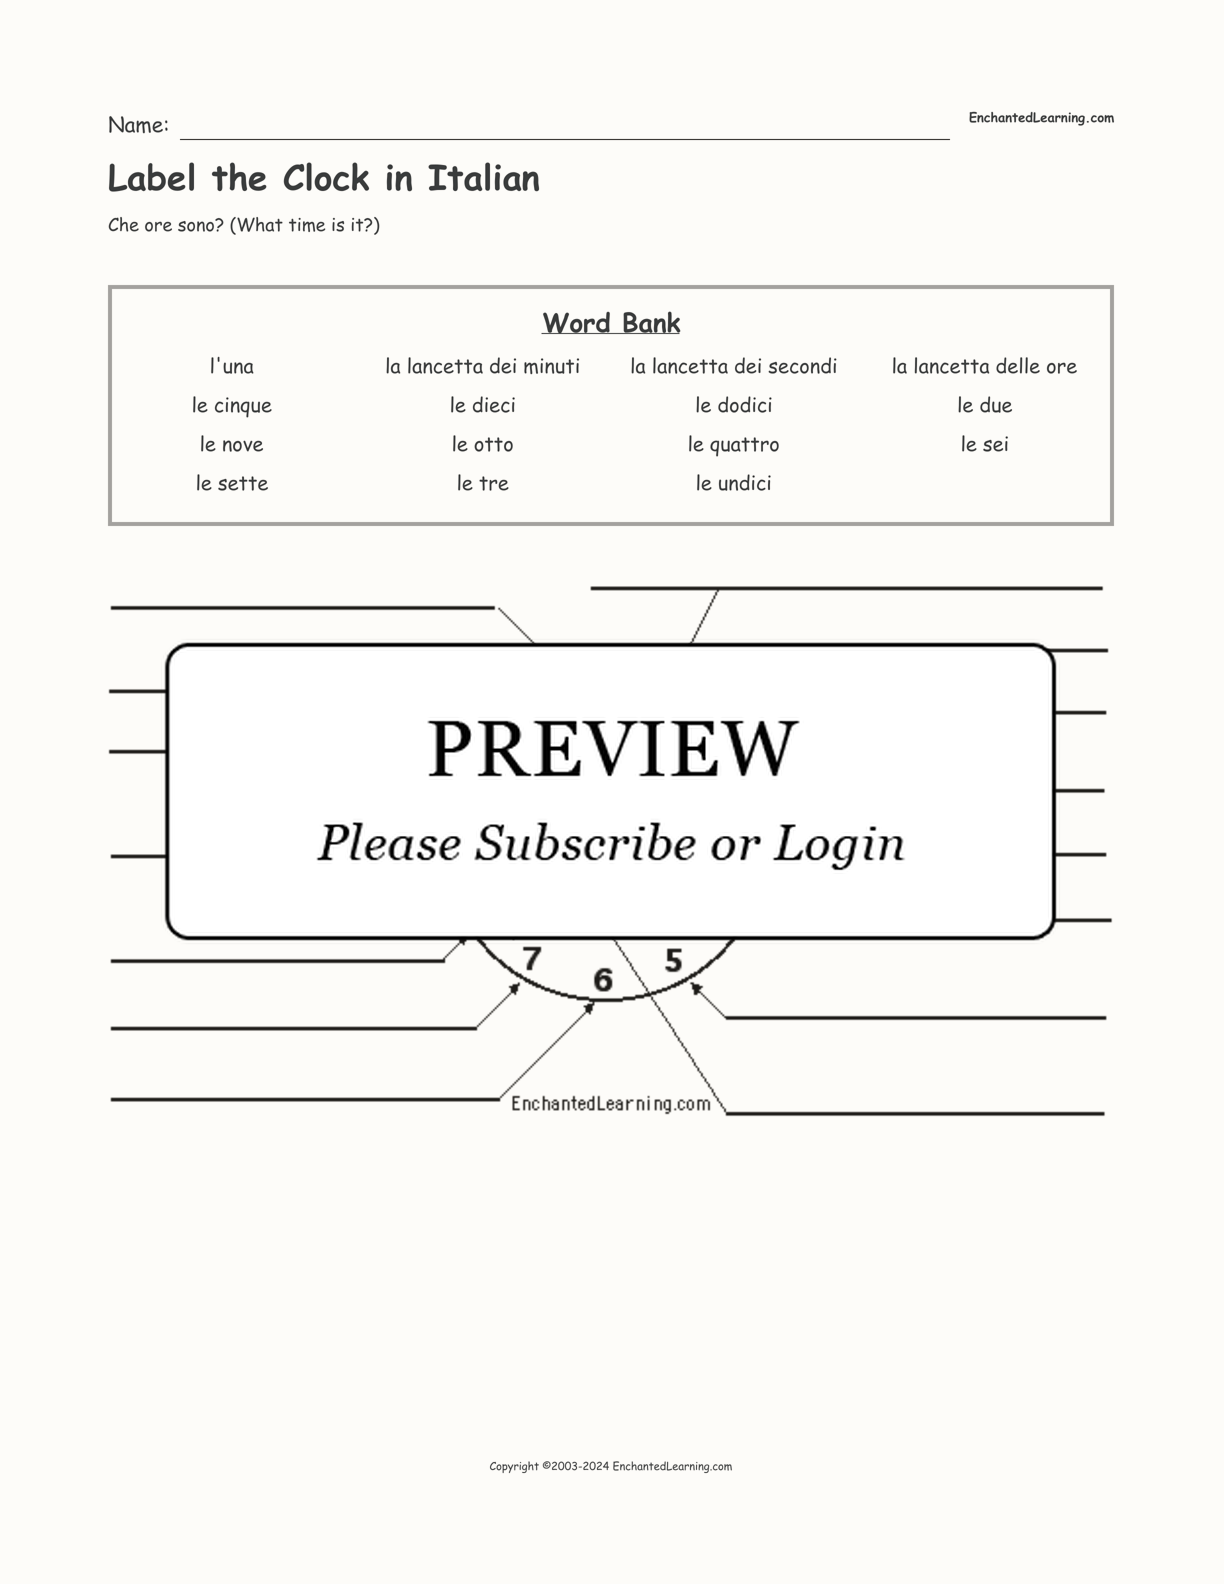 Label the Clock in Italian interactive worksheet page 1